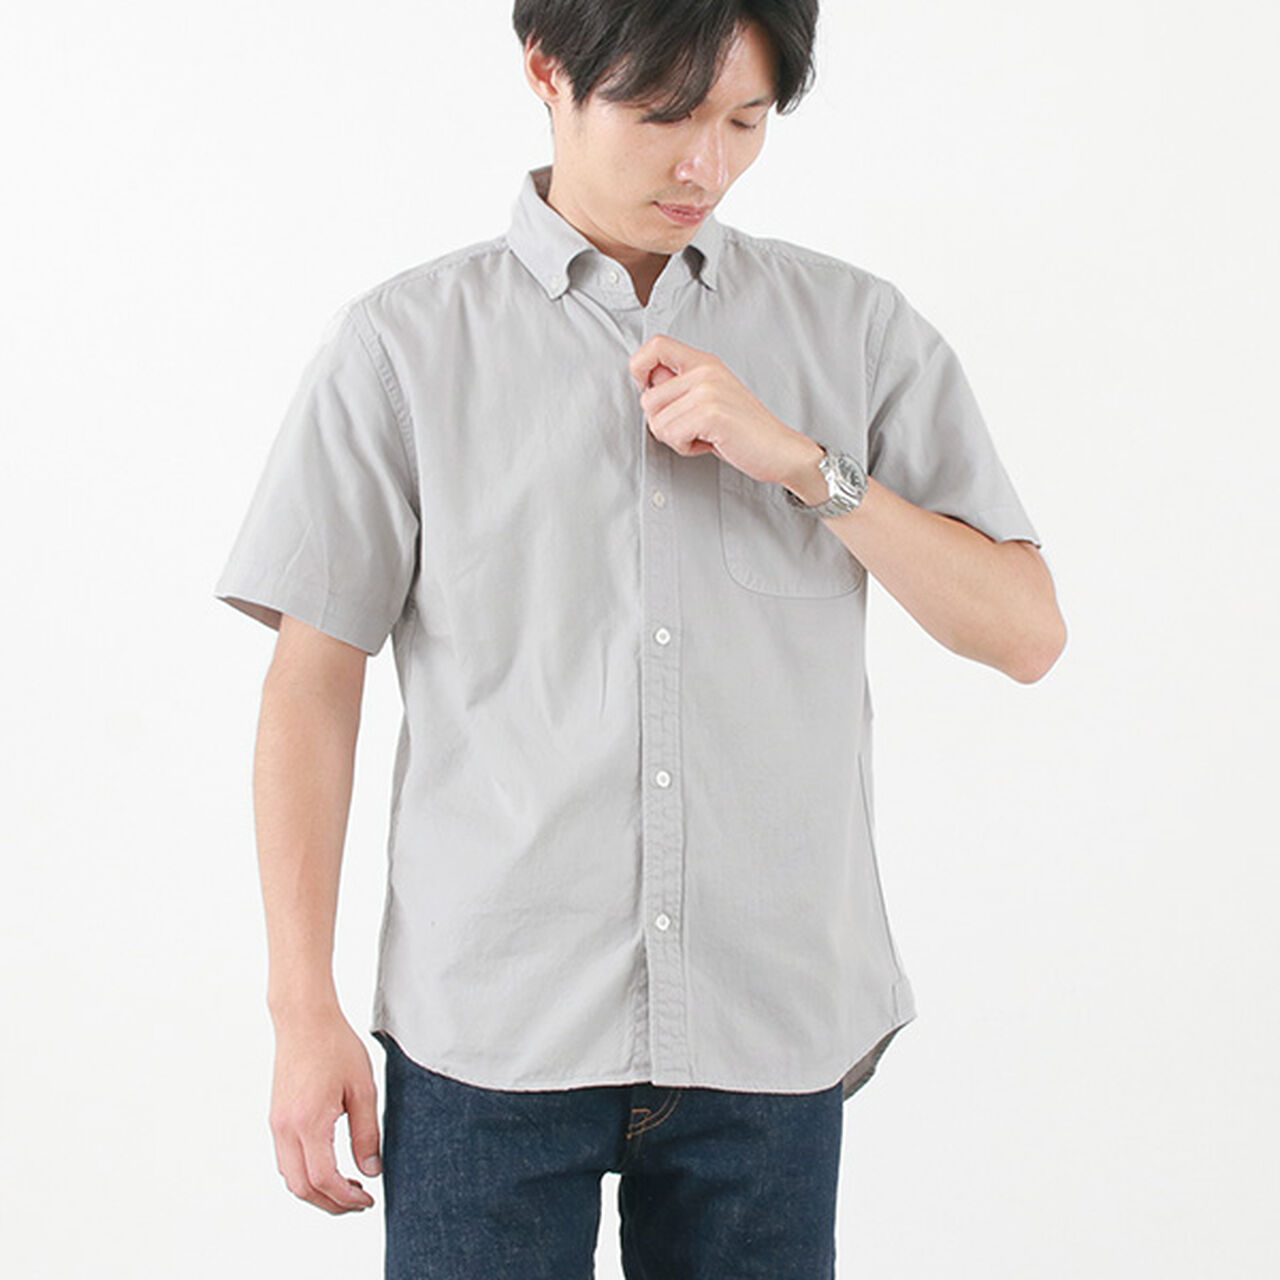 BR-5266 Ox S/S button-down shirt,Grey, large image number 0